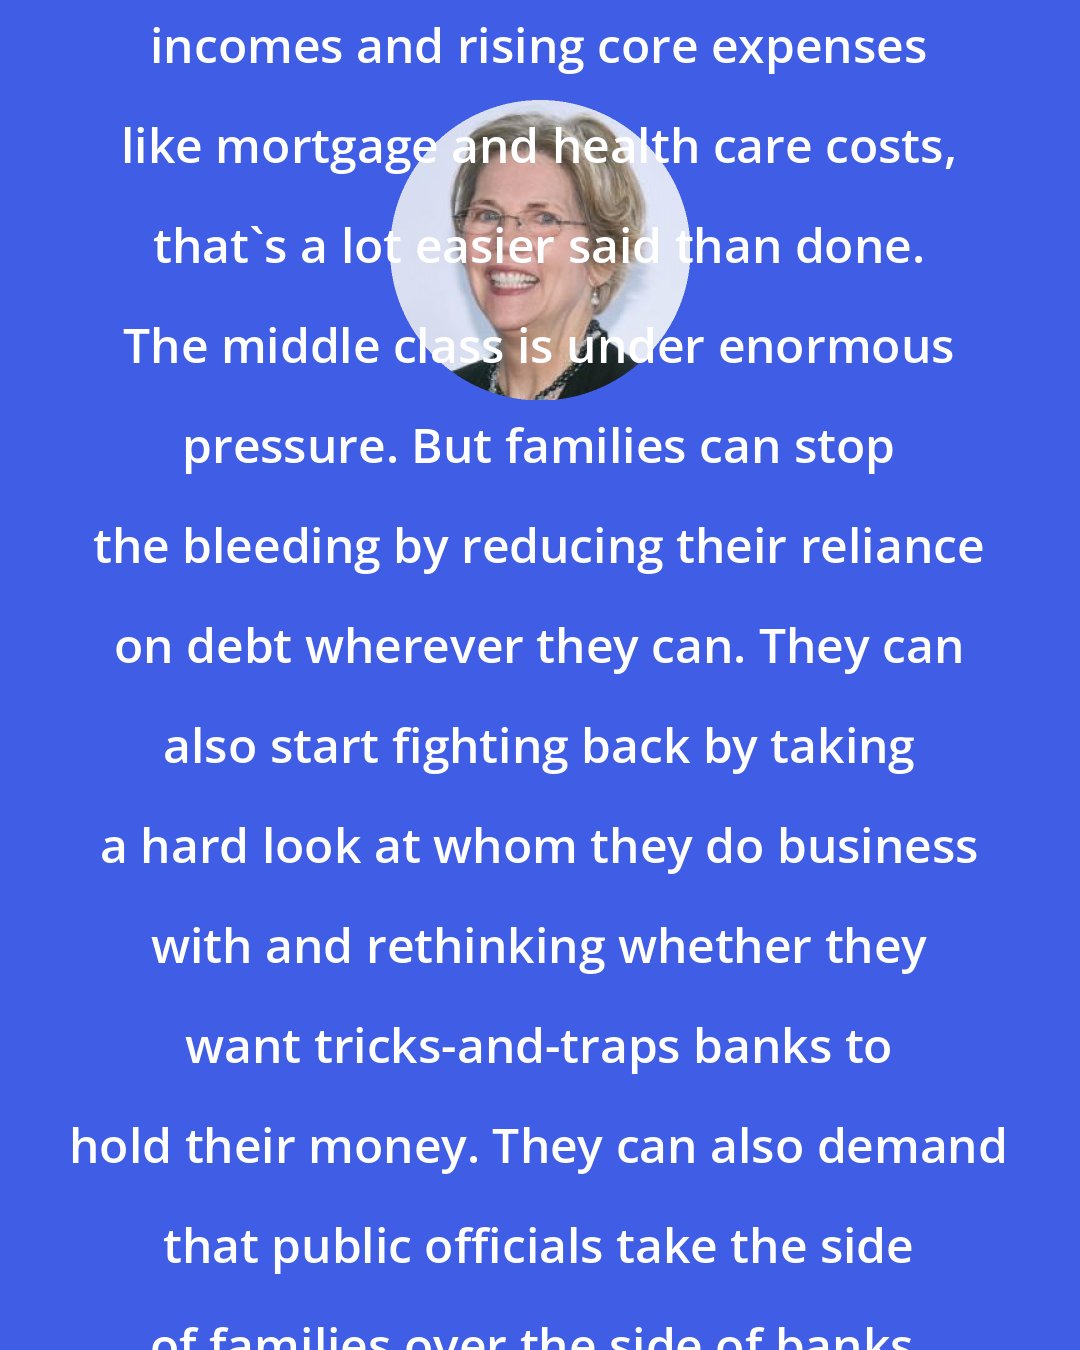 Elizabeth Warren: Get out of debt. In a world of stagnant incomes and rising core expenses like mortgage and health care costs, that's a lot easier said than done. The middle class is under enormous pressure. But families can stop the bleeding by reducing their reliance on debt wherever they can. They can also start fighting back by taking a hard look at whom they do business with and rethinking whether they want tricks-and-traps banks to hold their money. They can also demand that public officials take the side of families over the side of banks.